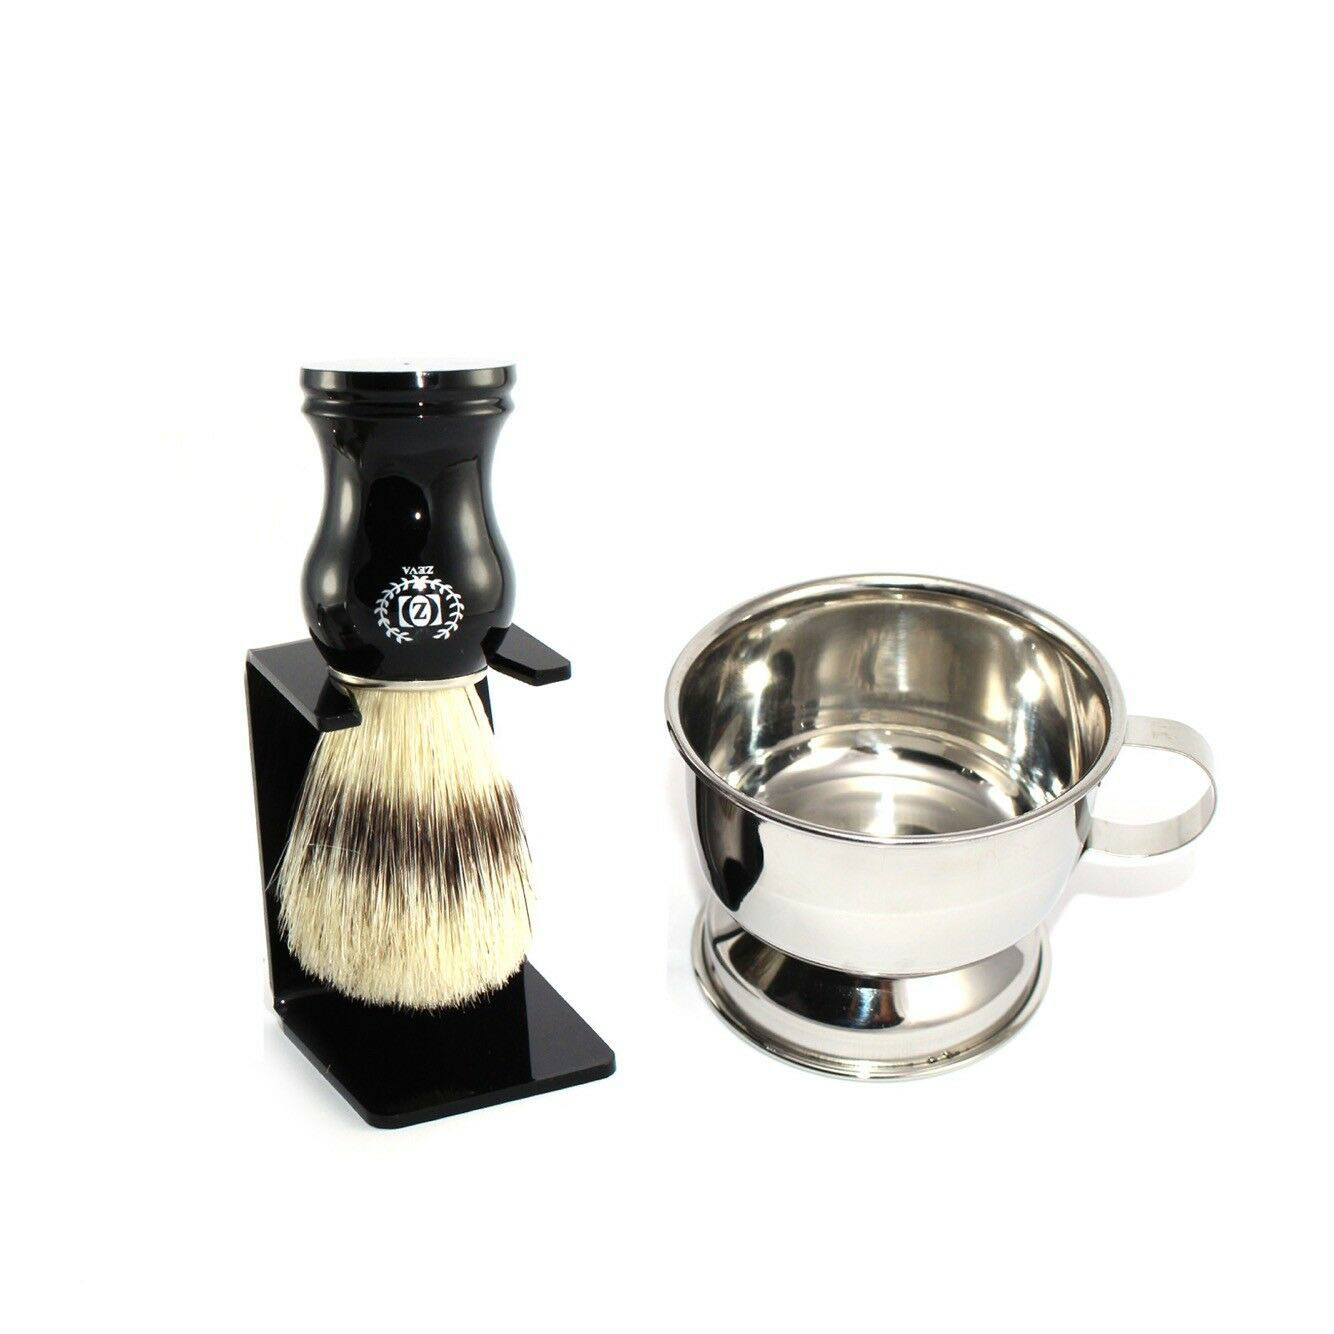 Boar Bristle Shave Brush and Cup Set